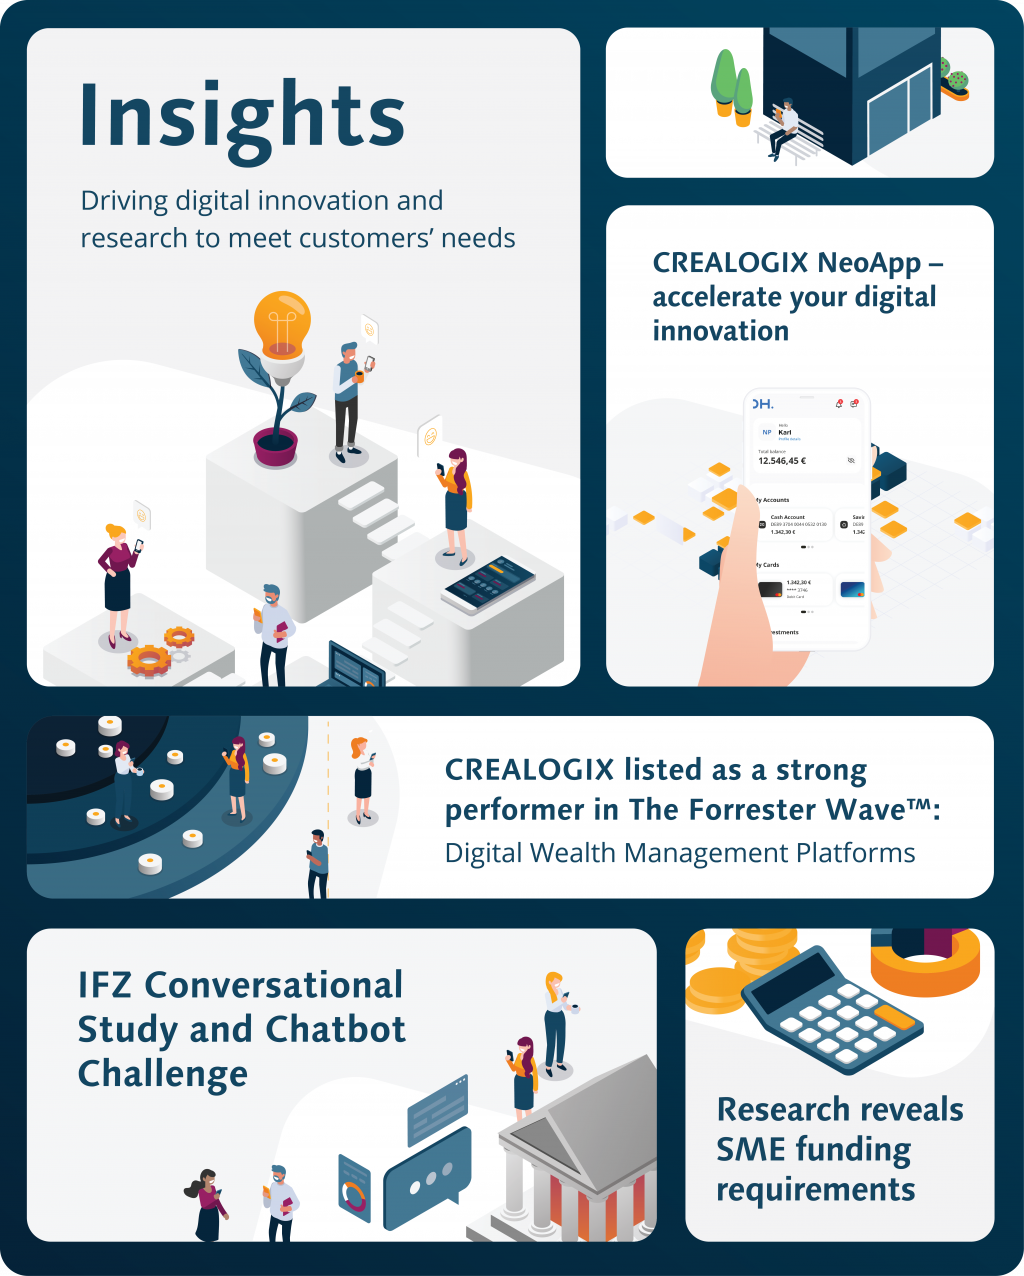 CREALOGIX Insights June 2022: Research & Innovation